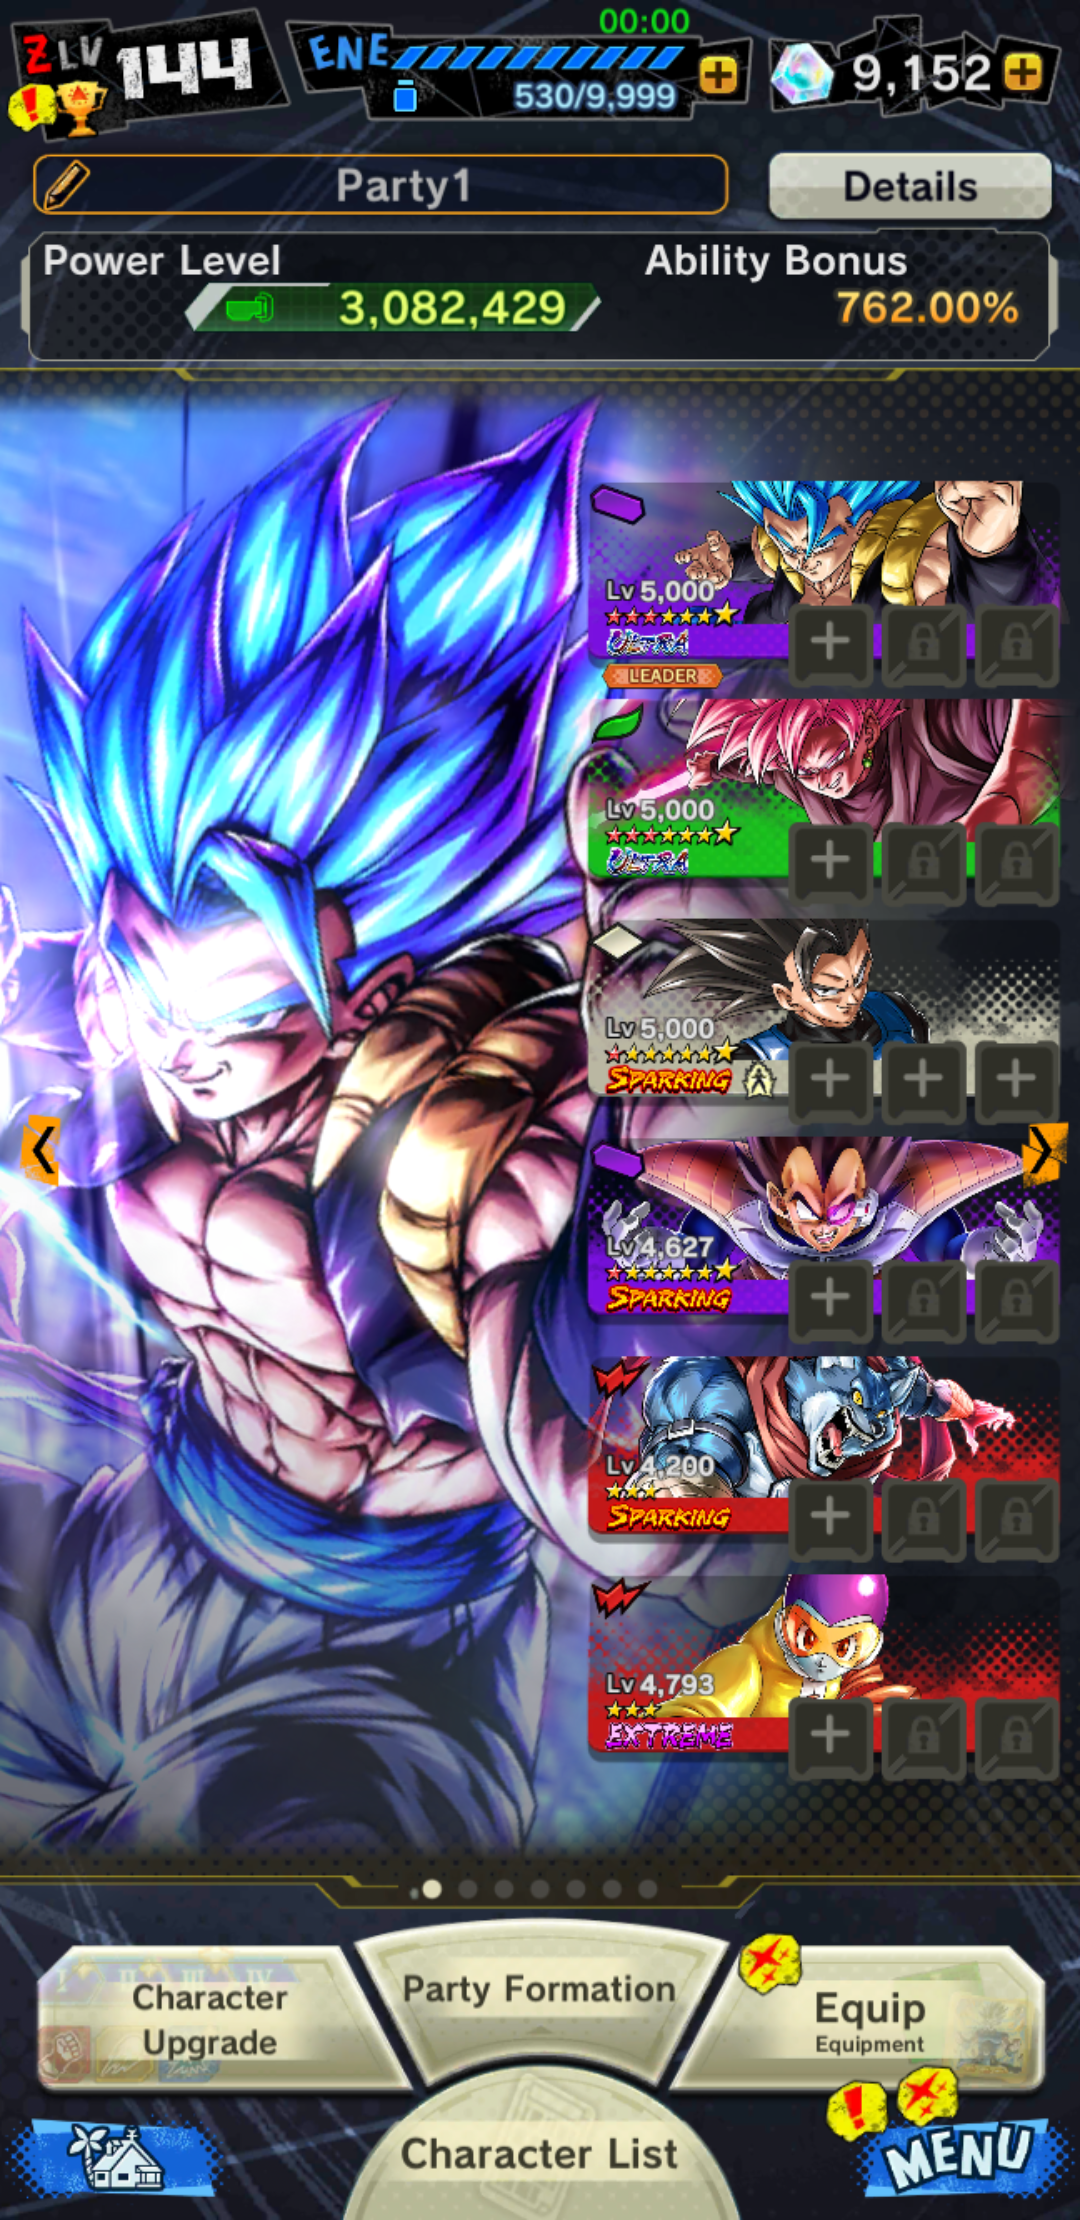 HOW TO GET ULTRA GOGETA BLUE IN DRAGON BALL LEGENDS (VERY EASY